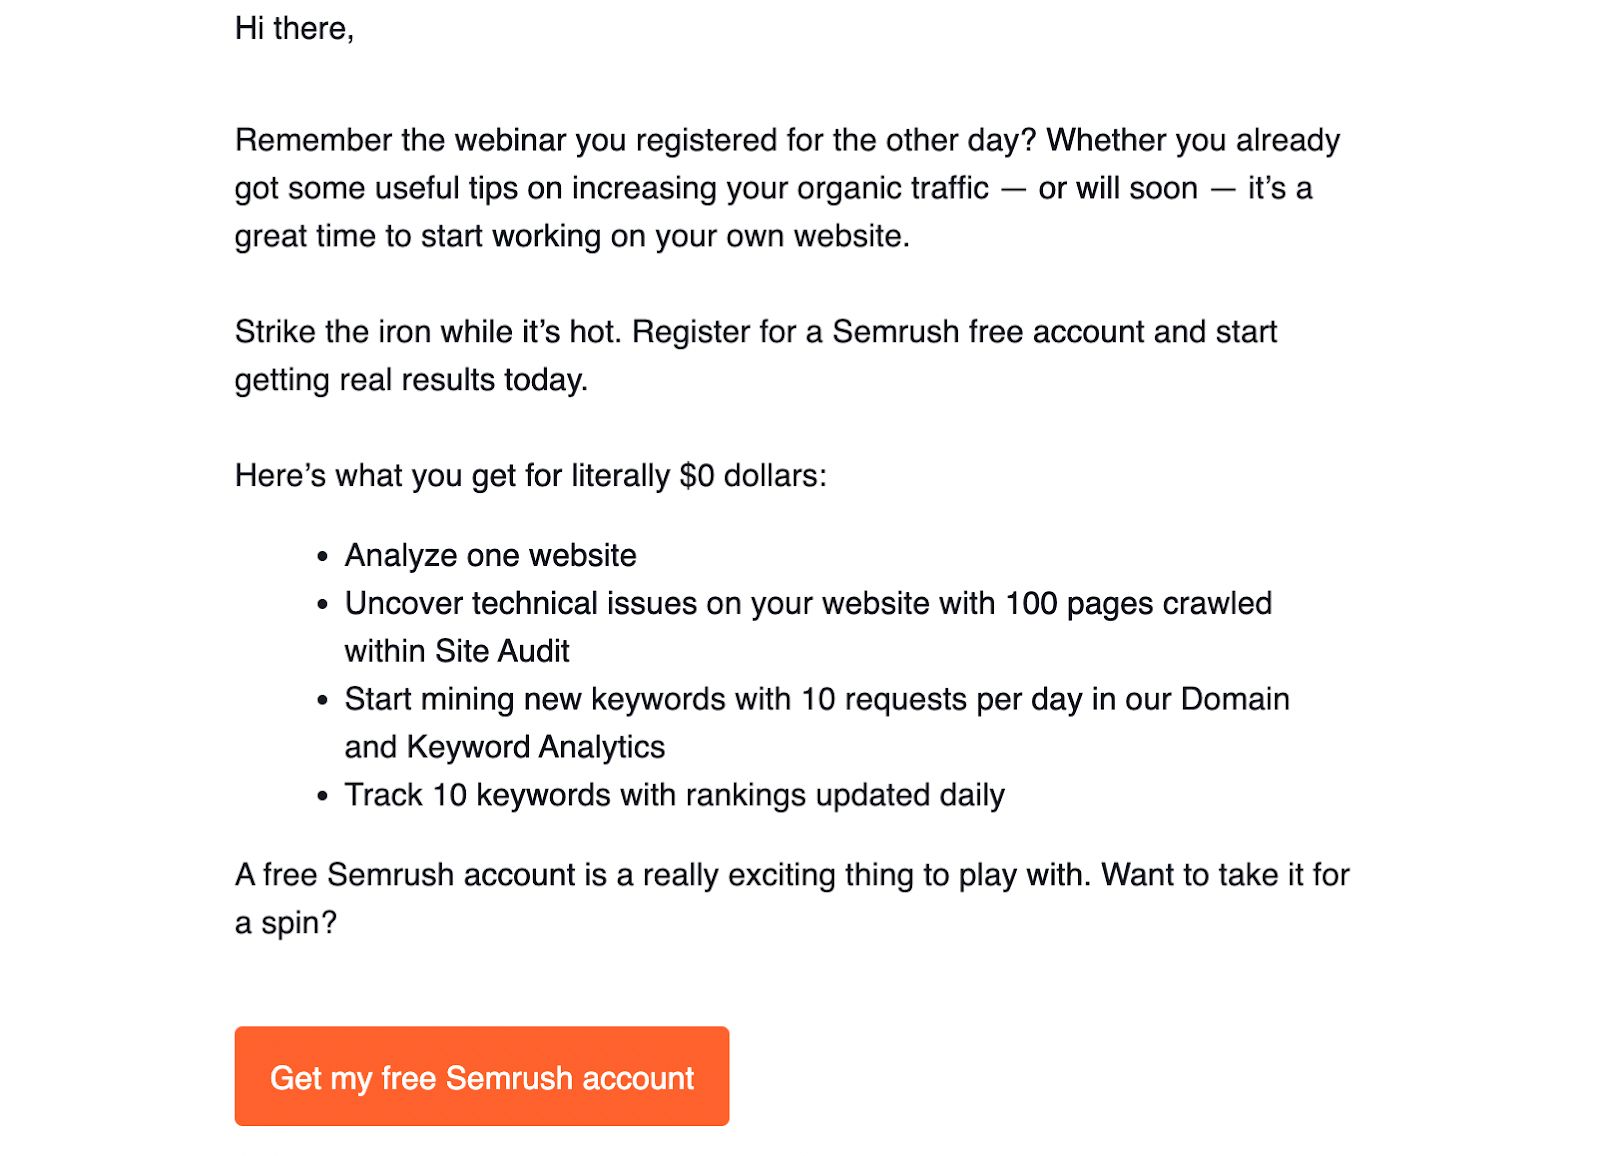 An example of a compelling email marketing campaign to increase website traffic.